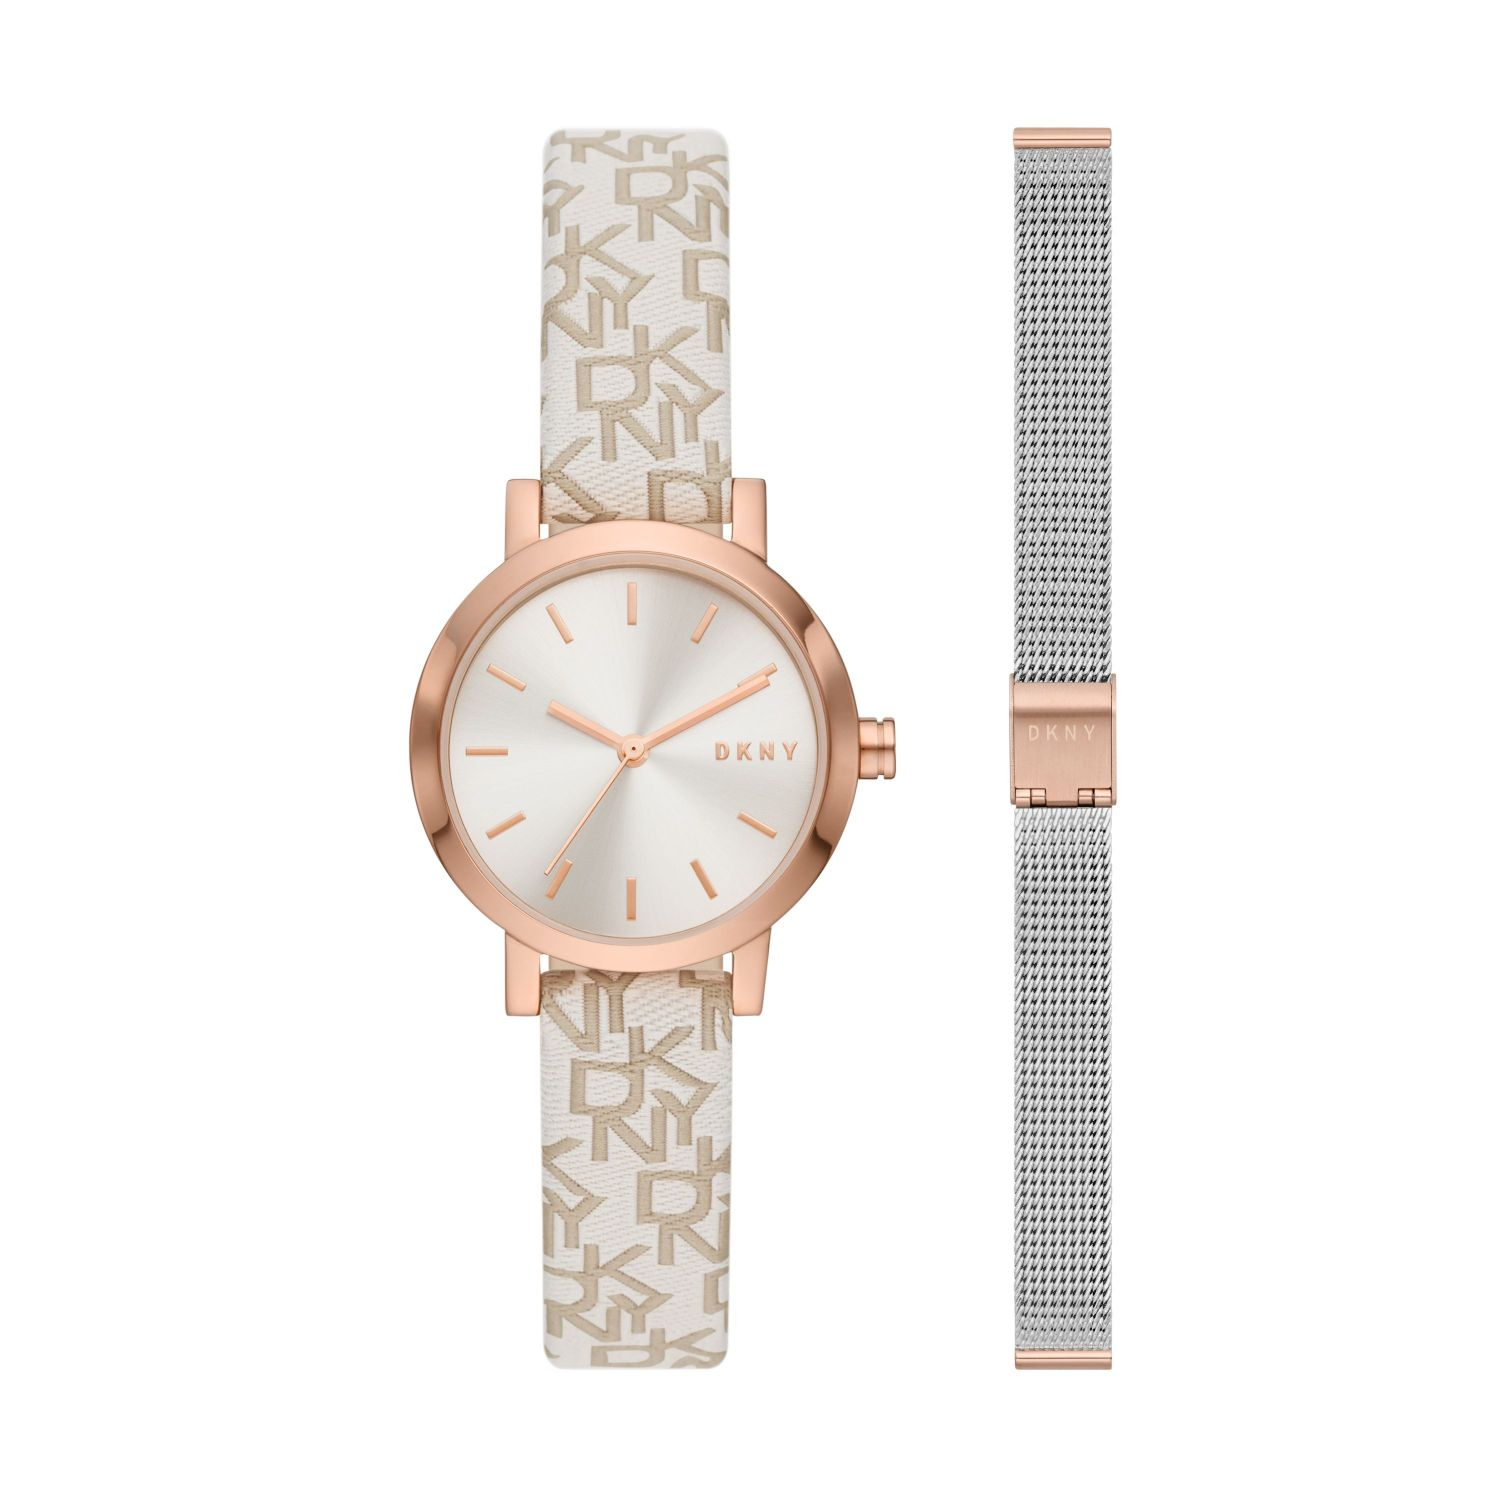 Womens DKNY watch in pink gold plated stainless steel with beige dial and leather strap. 